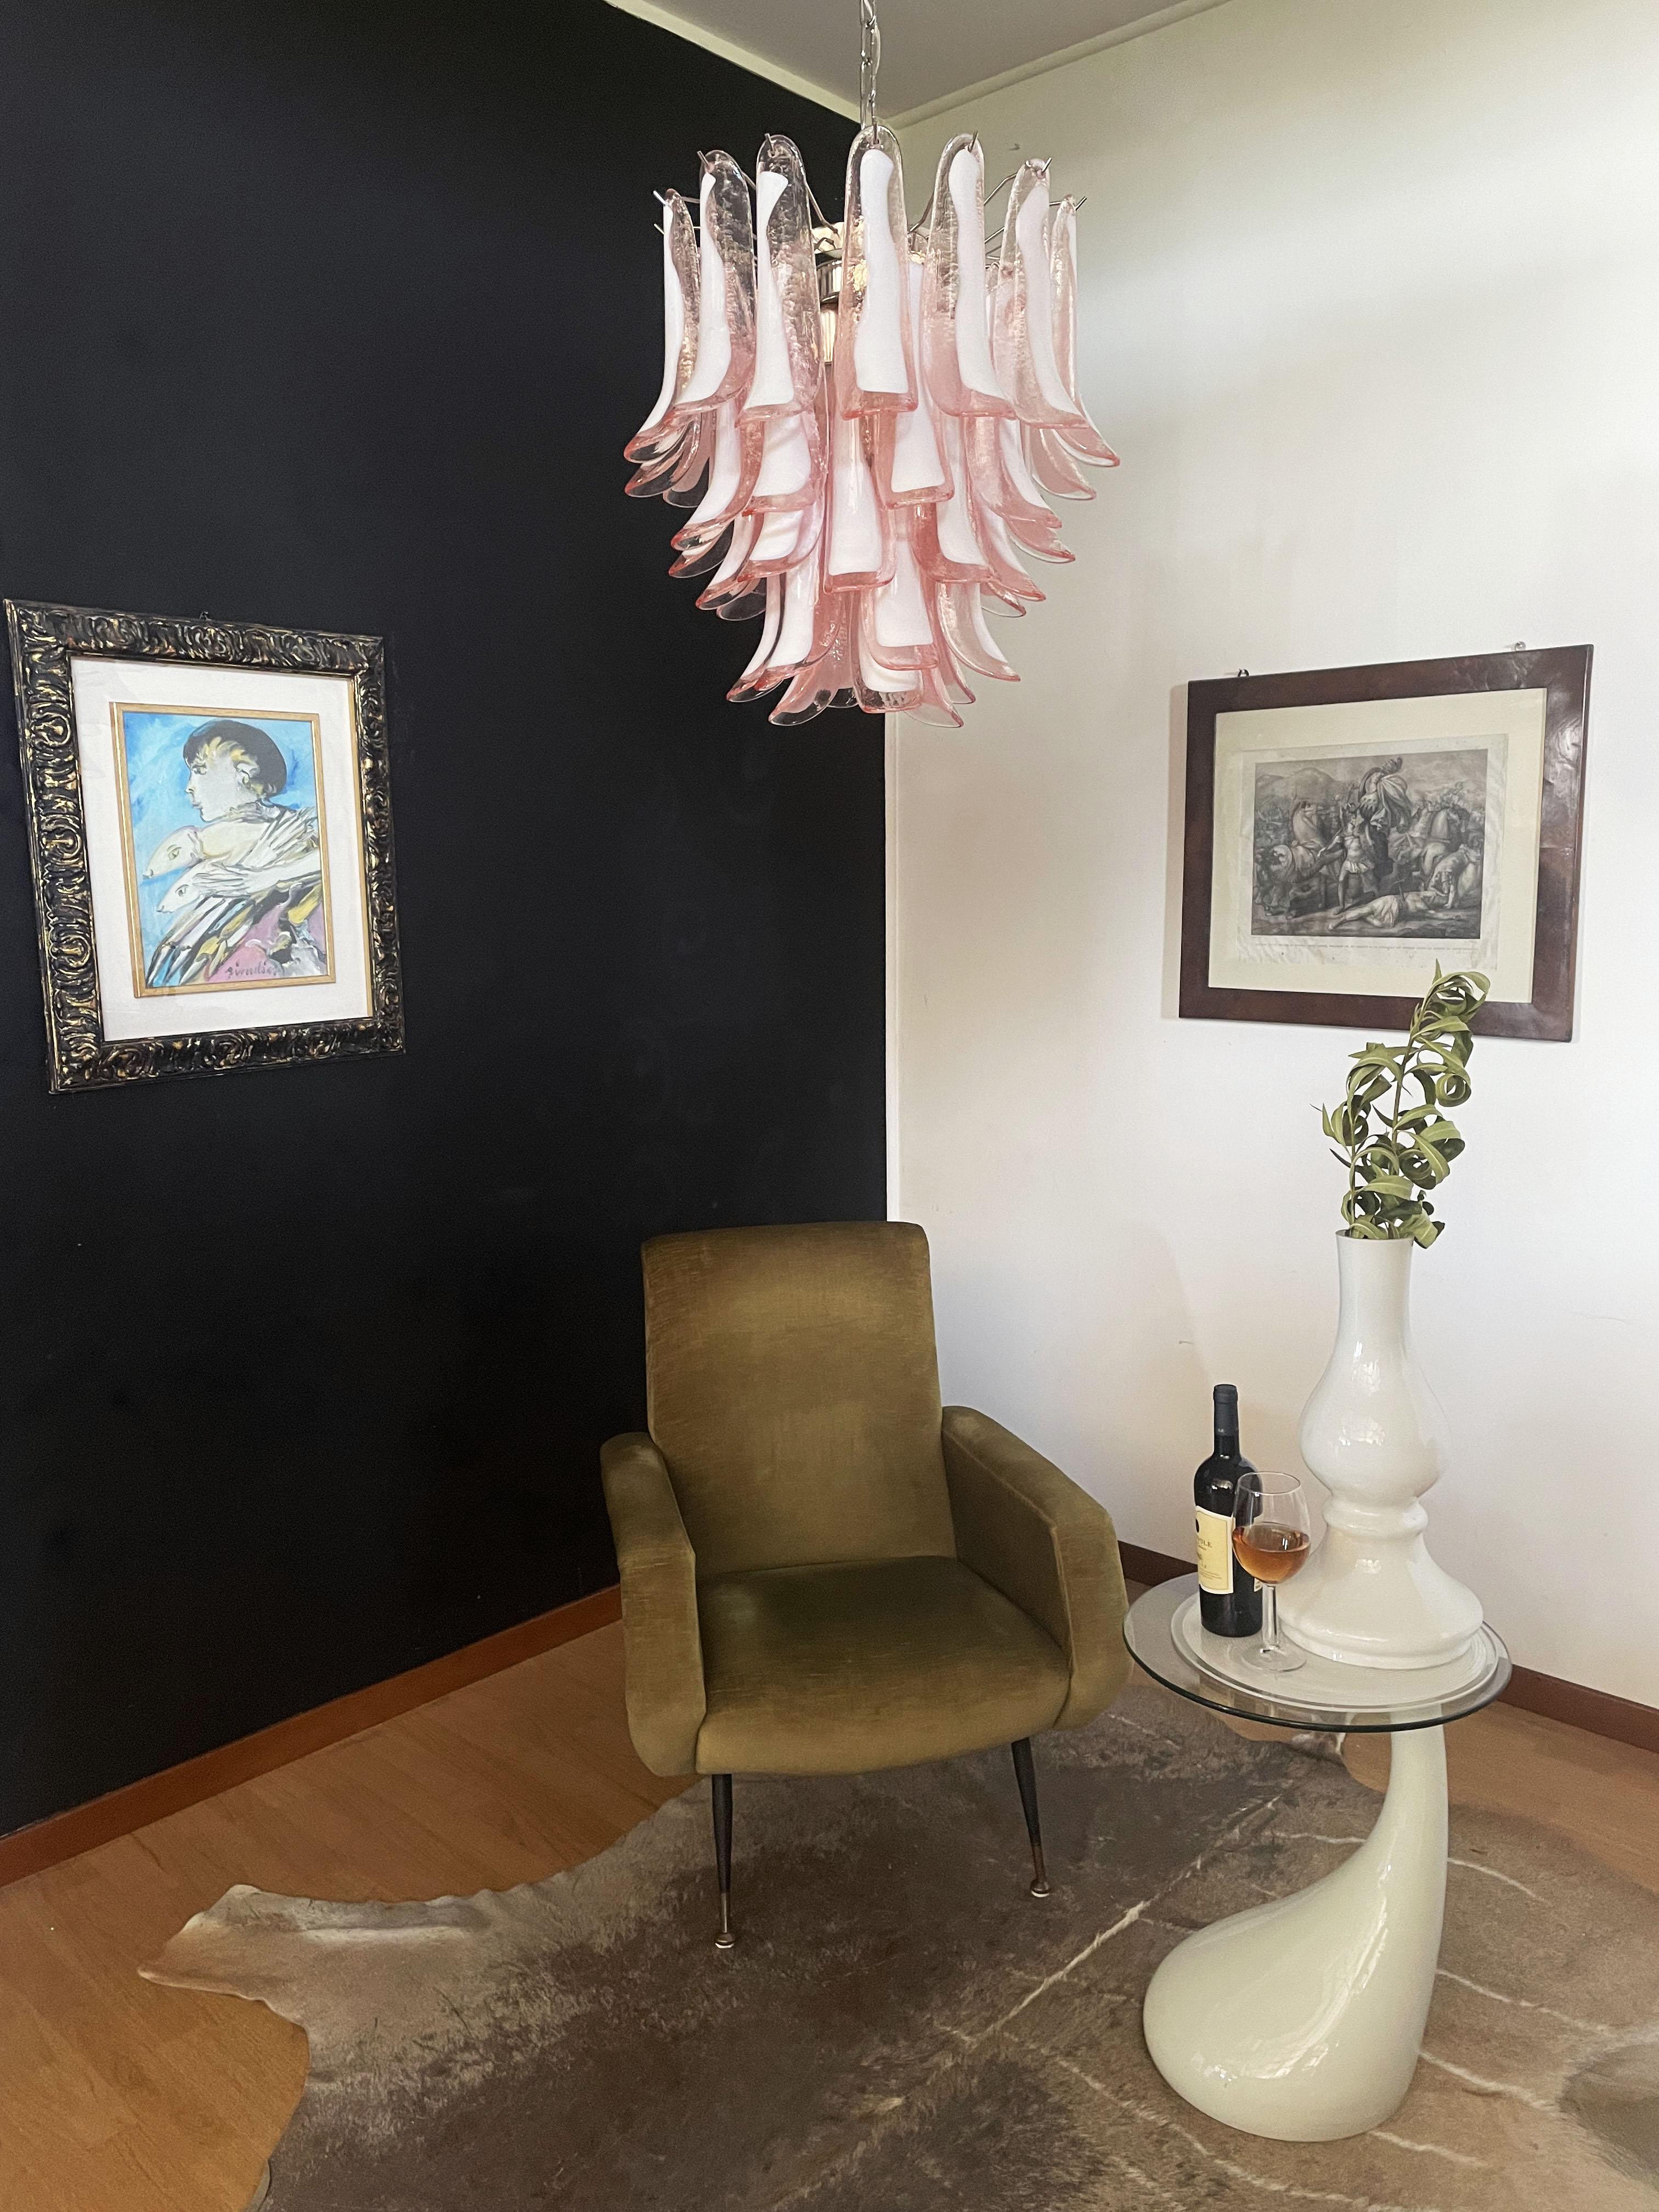 1970’s Murano Italian glass chandelier. Fantastic chandelier with pink and white “lattimo” glasses, nickel-plated metal frame. It has 41 big monumental petals glass. The glasses are very high quality, the photos do not do the beauty, luster of these